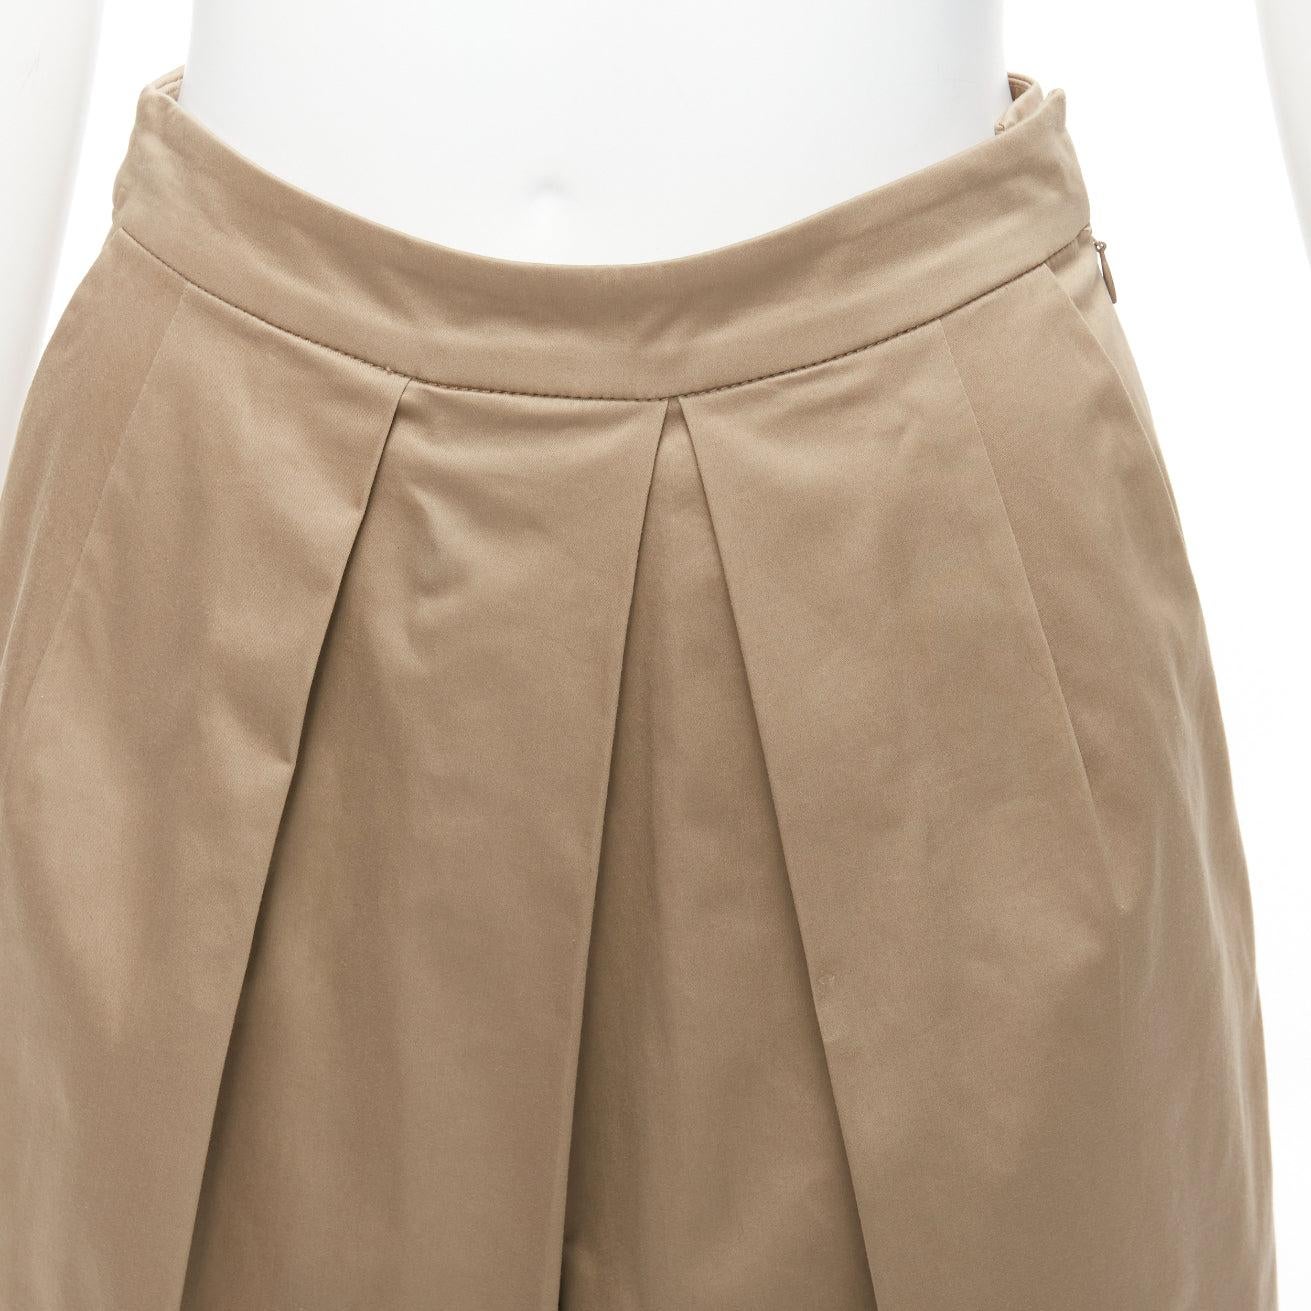 TOME 100% coated cotton tan brown pleated front wide leg pants US2 S
Reference: LNKO/A02281
Brand: Tome
Material: Cotton
Color: Beige
Pattern: Solid
Closure: Zip
Extra Details: Side zip. 2 pockets at back.
Made in: United